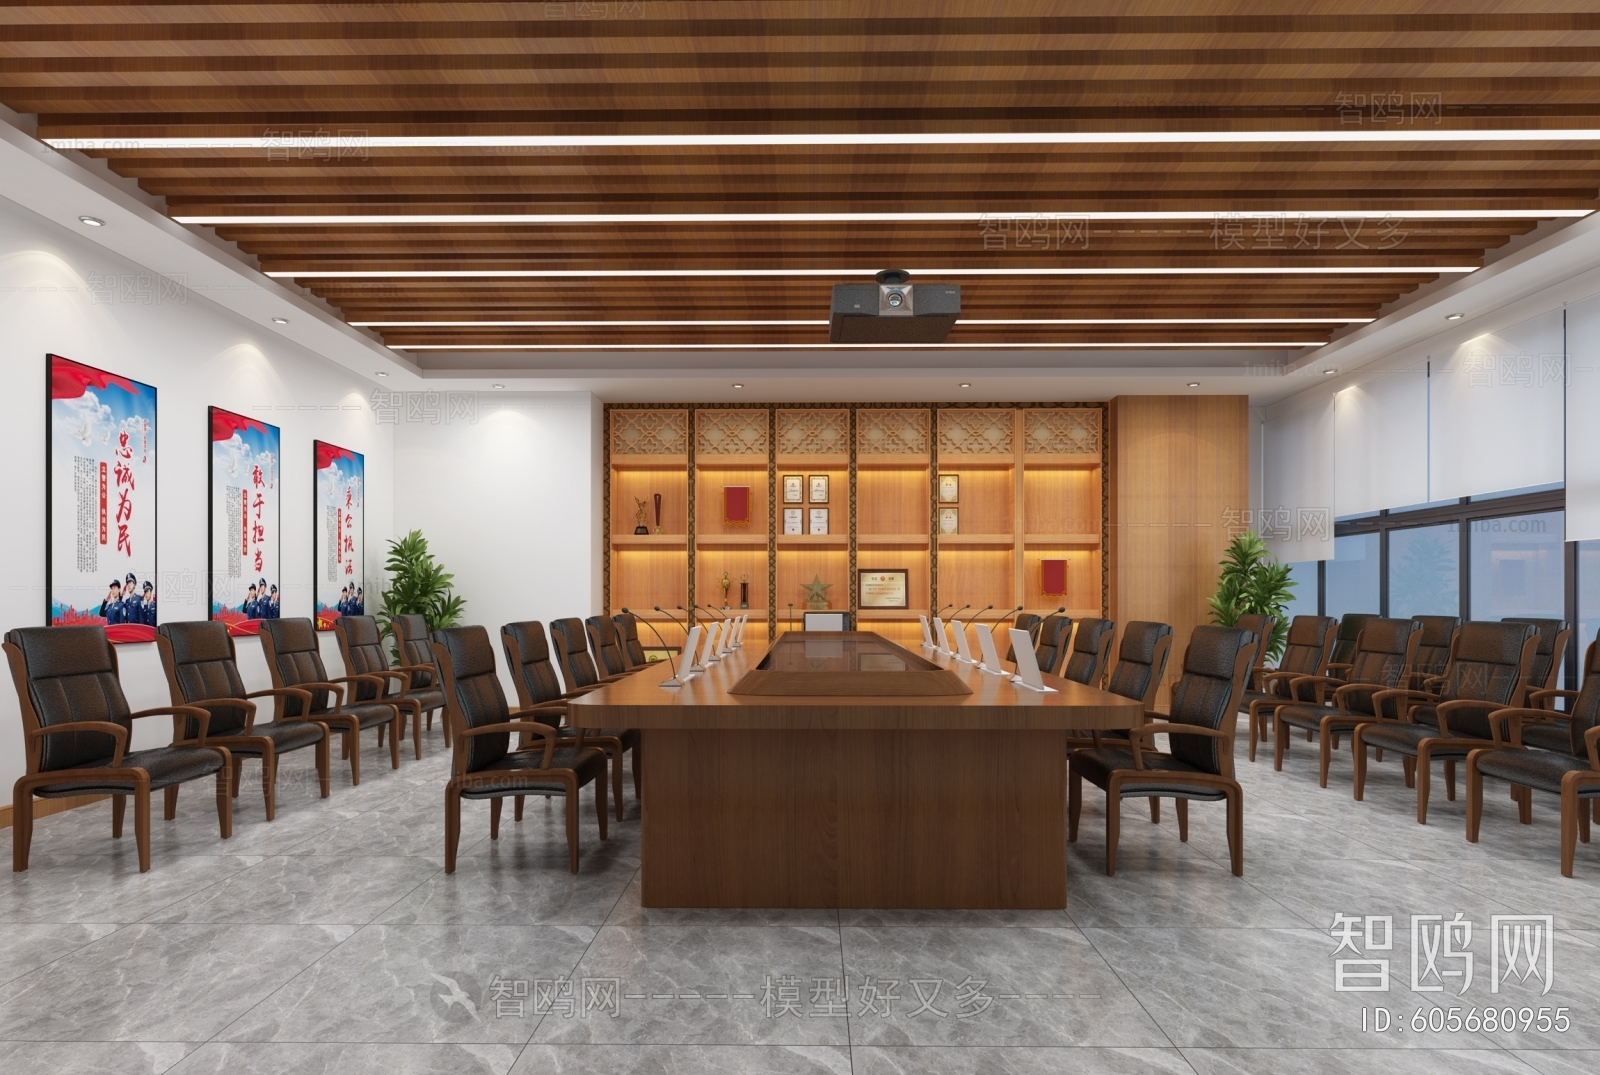 Southeast Asian Style Meeting Room